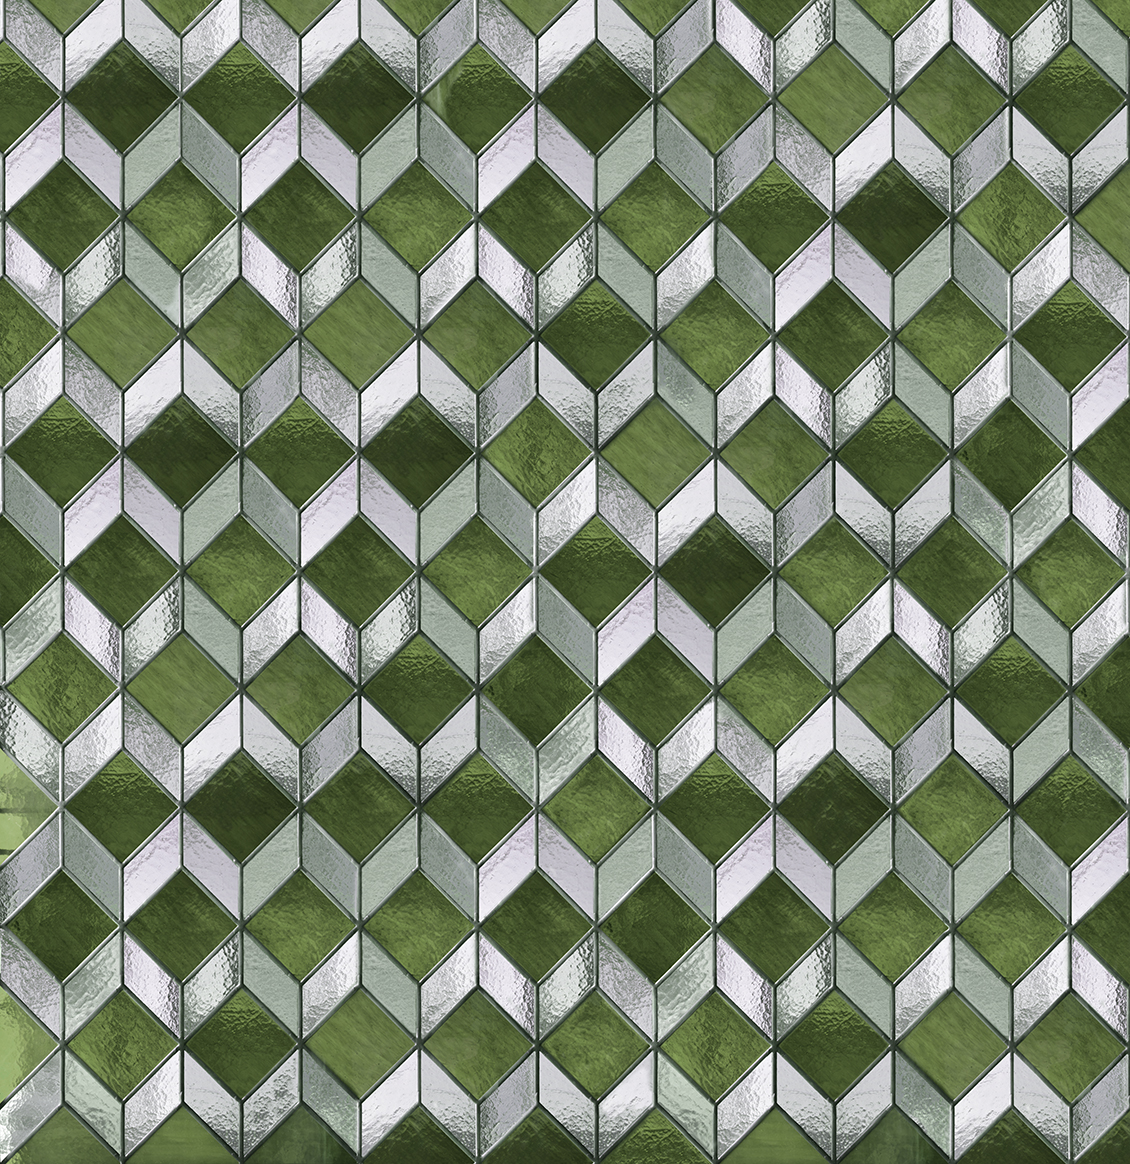 3D wallpaper with green and white diamond stained glass